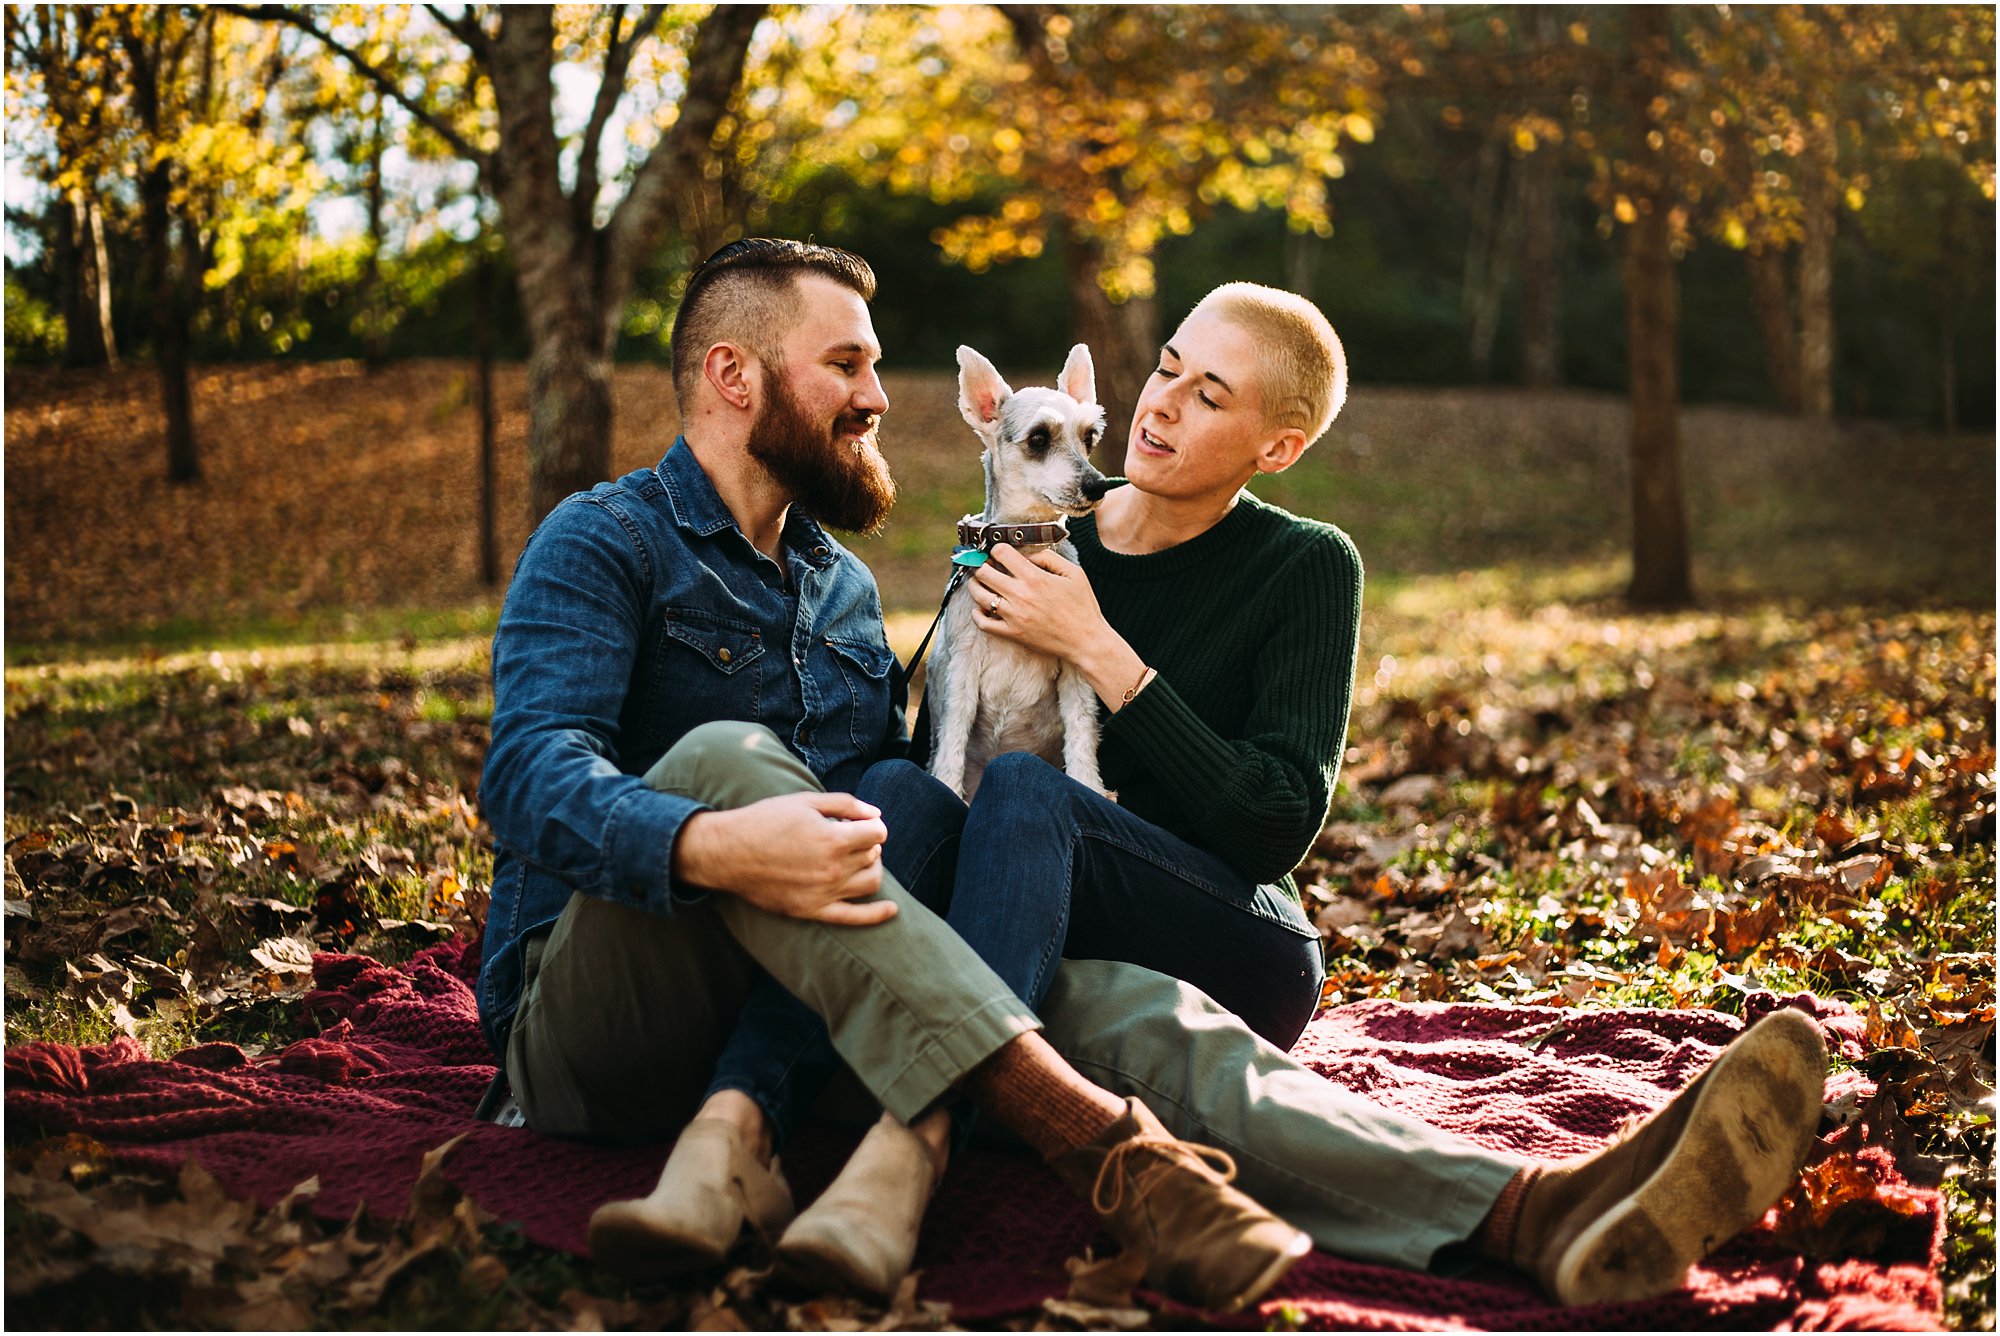 Couple sitting on blanket in park with their dog